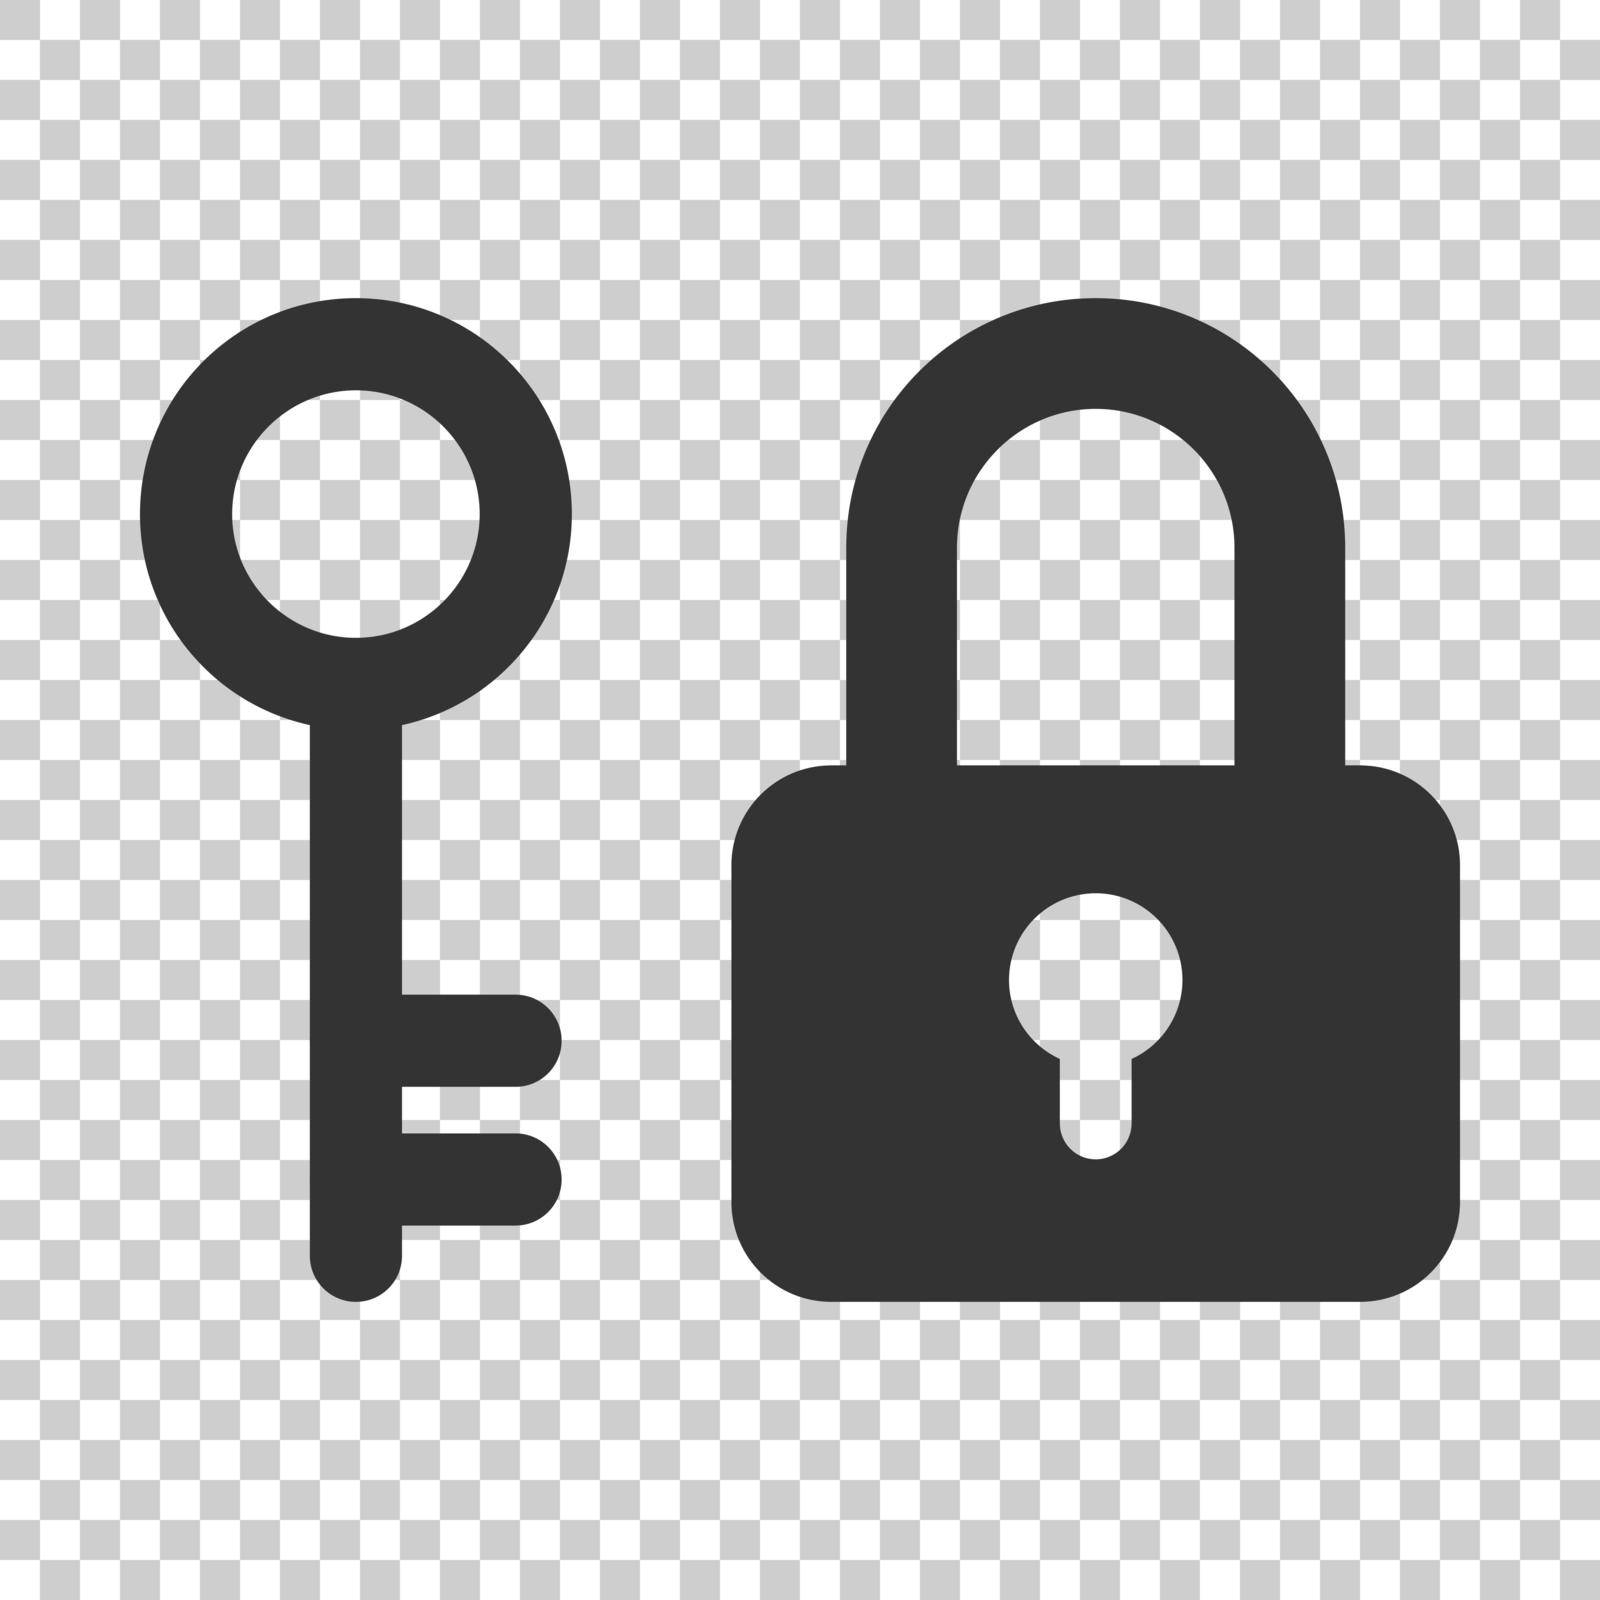 Key with padlock icon in flat style. Access login vector illustration on isolated background. Lock keyhole business concept.